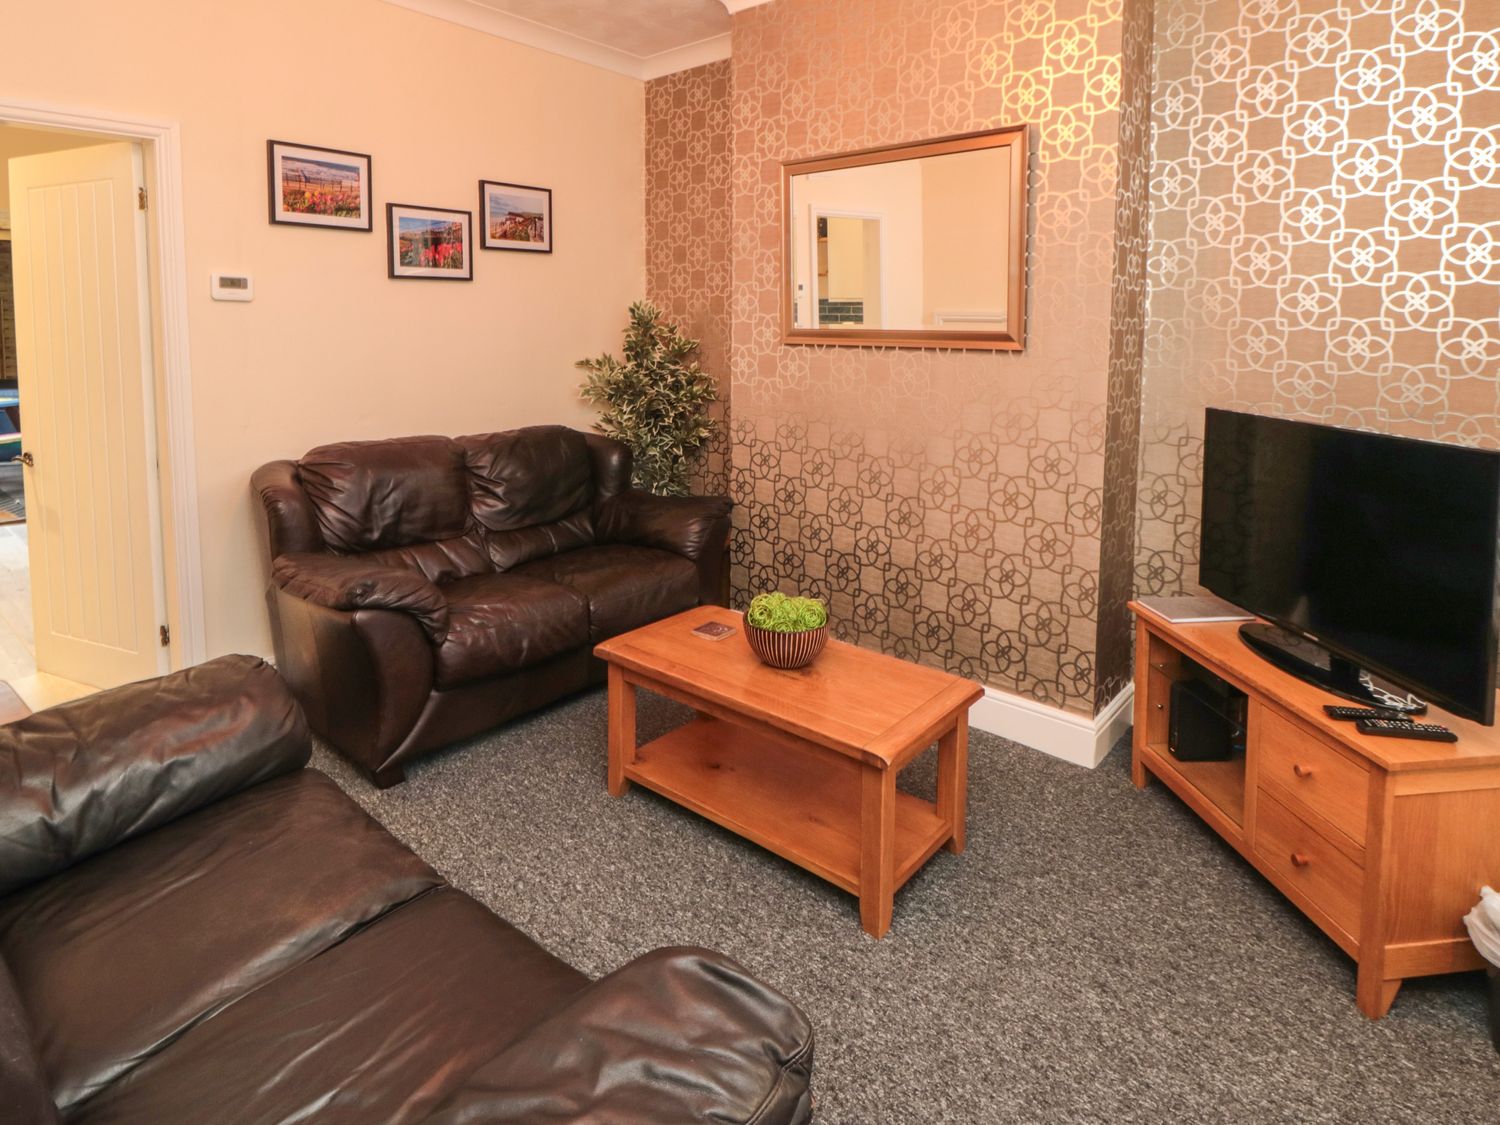 10 Walton Terrace in Guisborough, North Yorkshire. Two-bedroom home with hot tub. Set near amenities